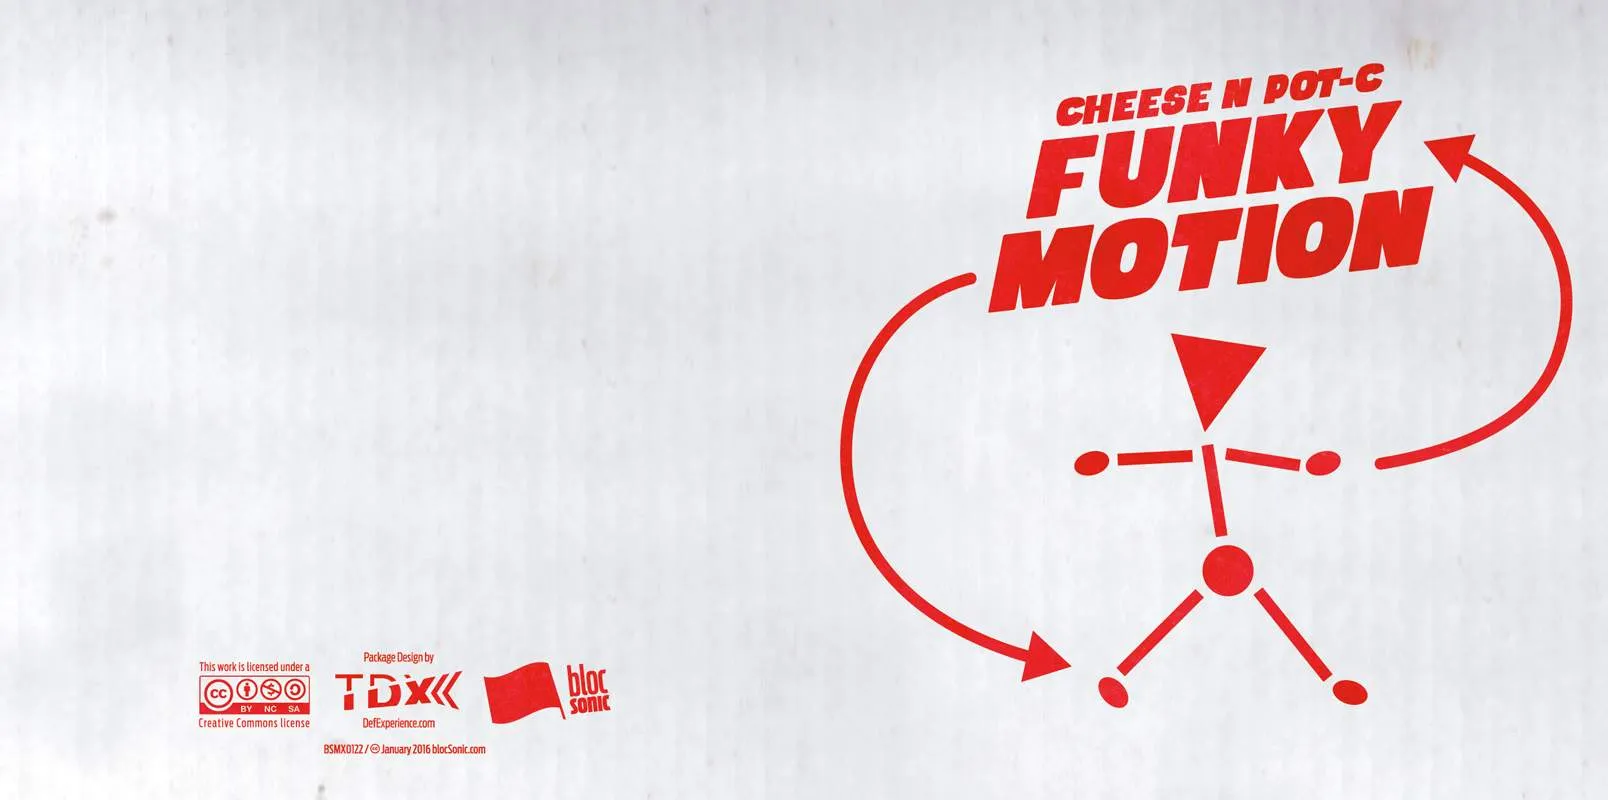 Album insert for “Funky Motion” by Cheese N Pot-C